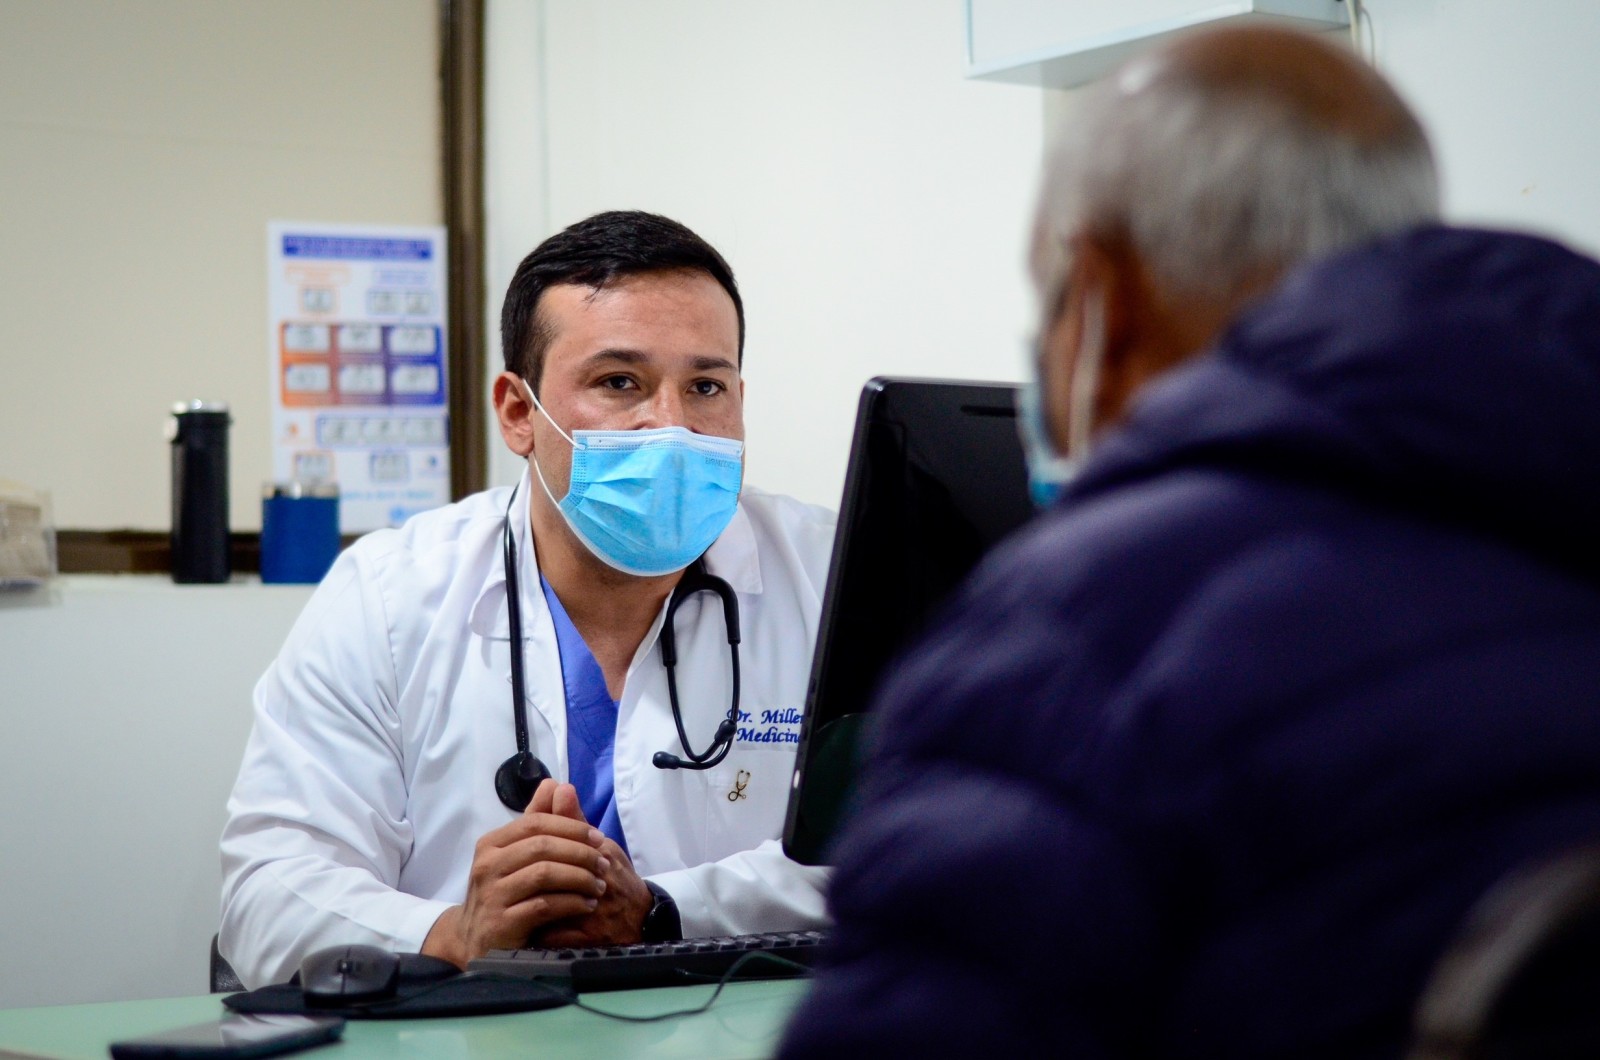 A doctor has a consultation with a patient. The patient's face is not seen.